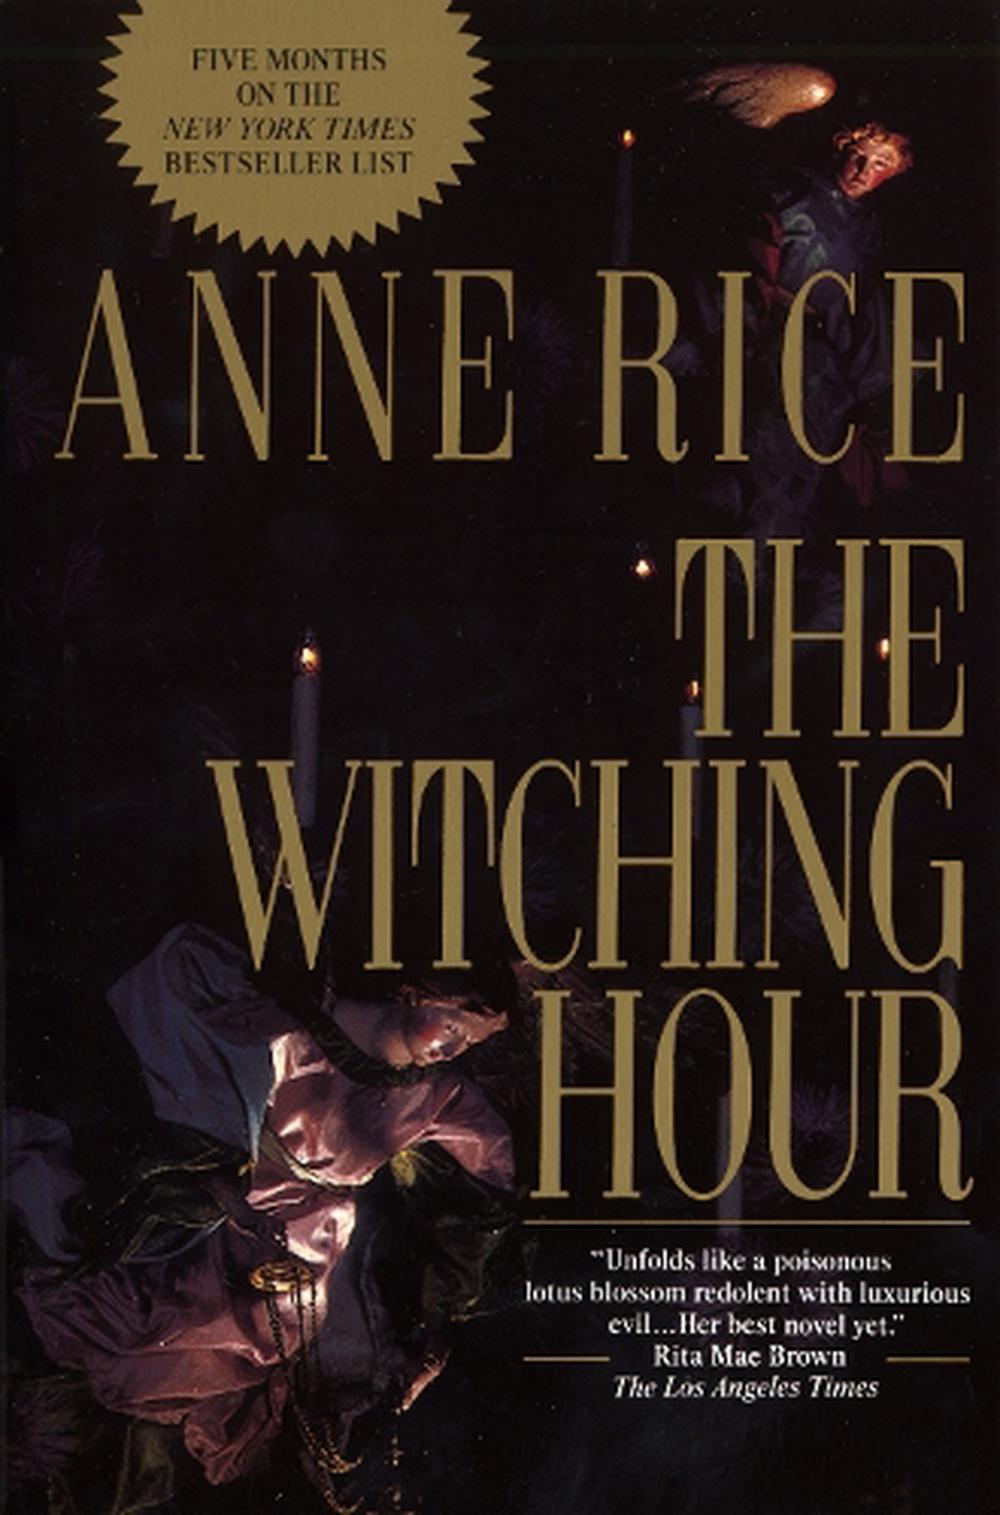 Poems from the Witching Hour by Pam Reed-Yang